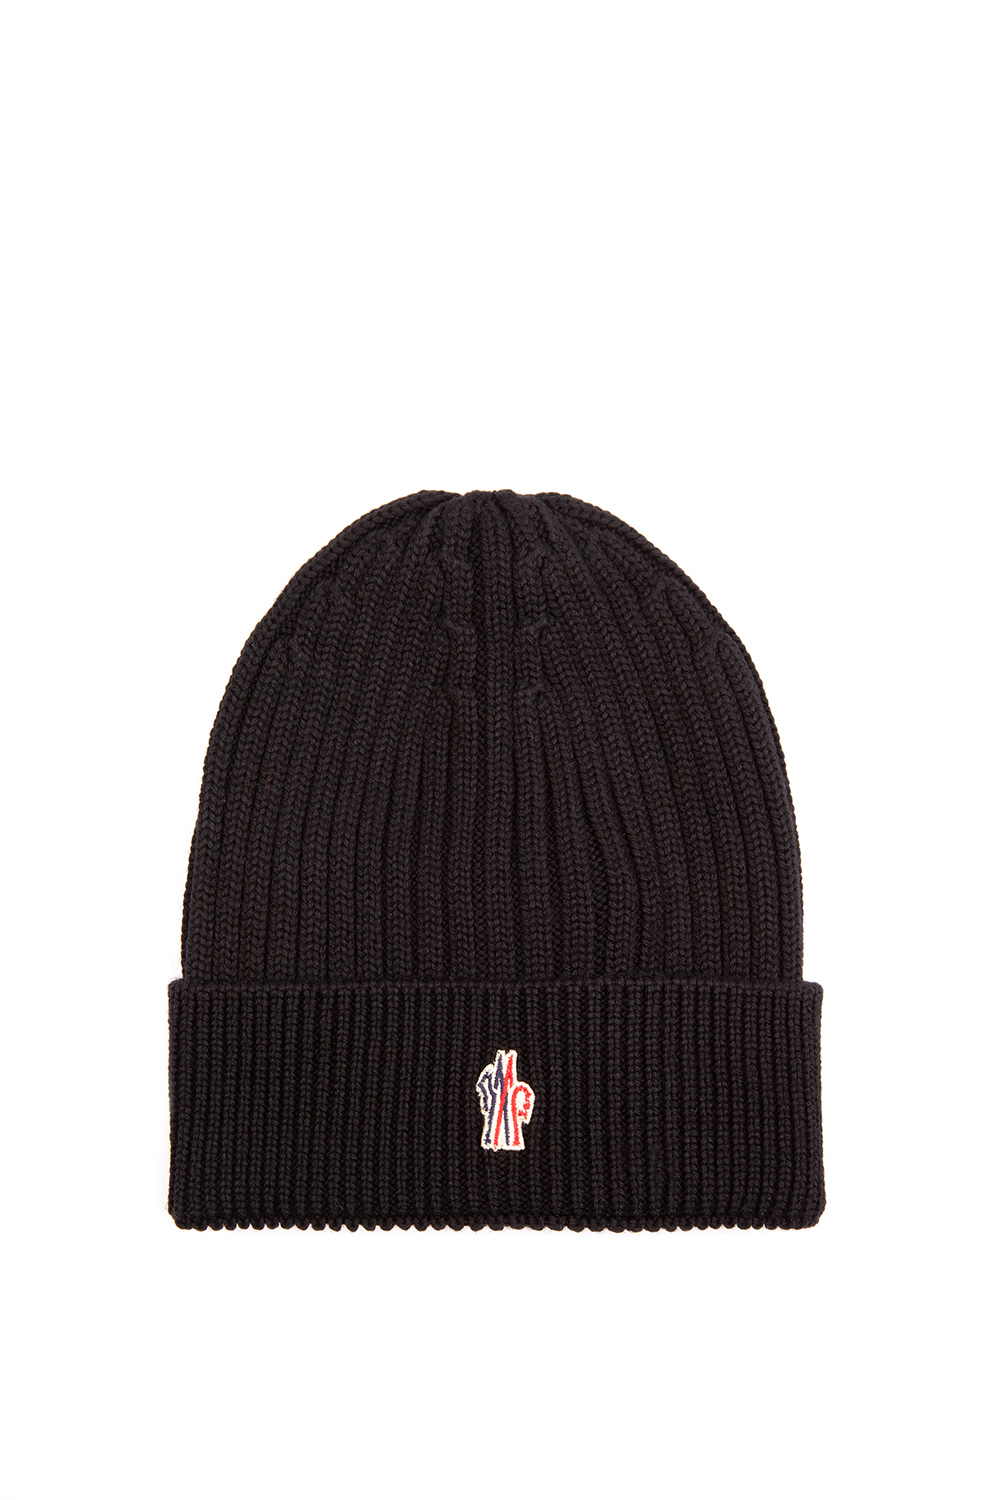 moncler wooly hat mens